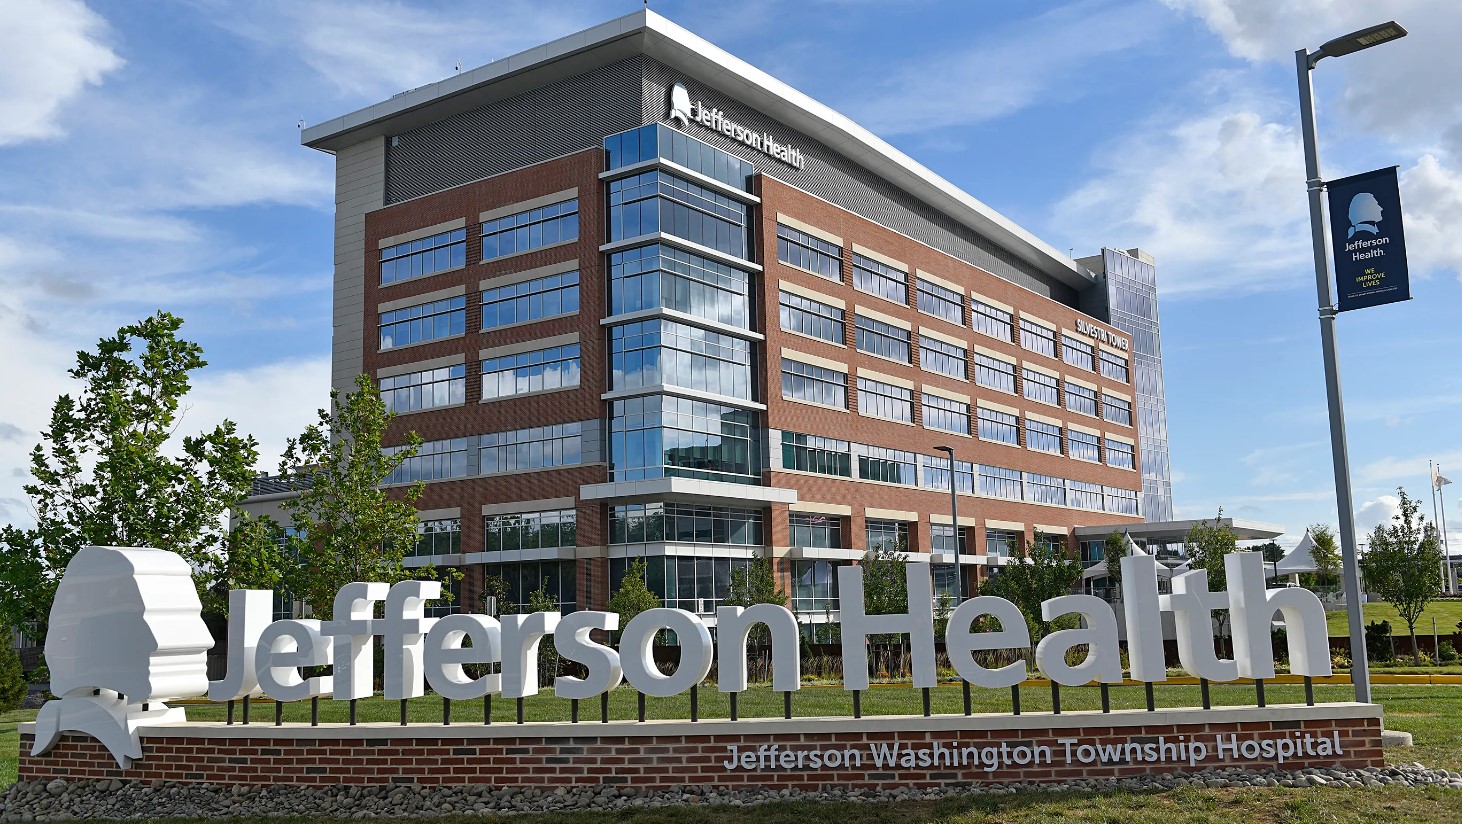 Photo of hospital where gift shop in Jefferson Washington Township Hospital is located